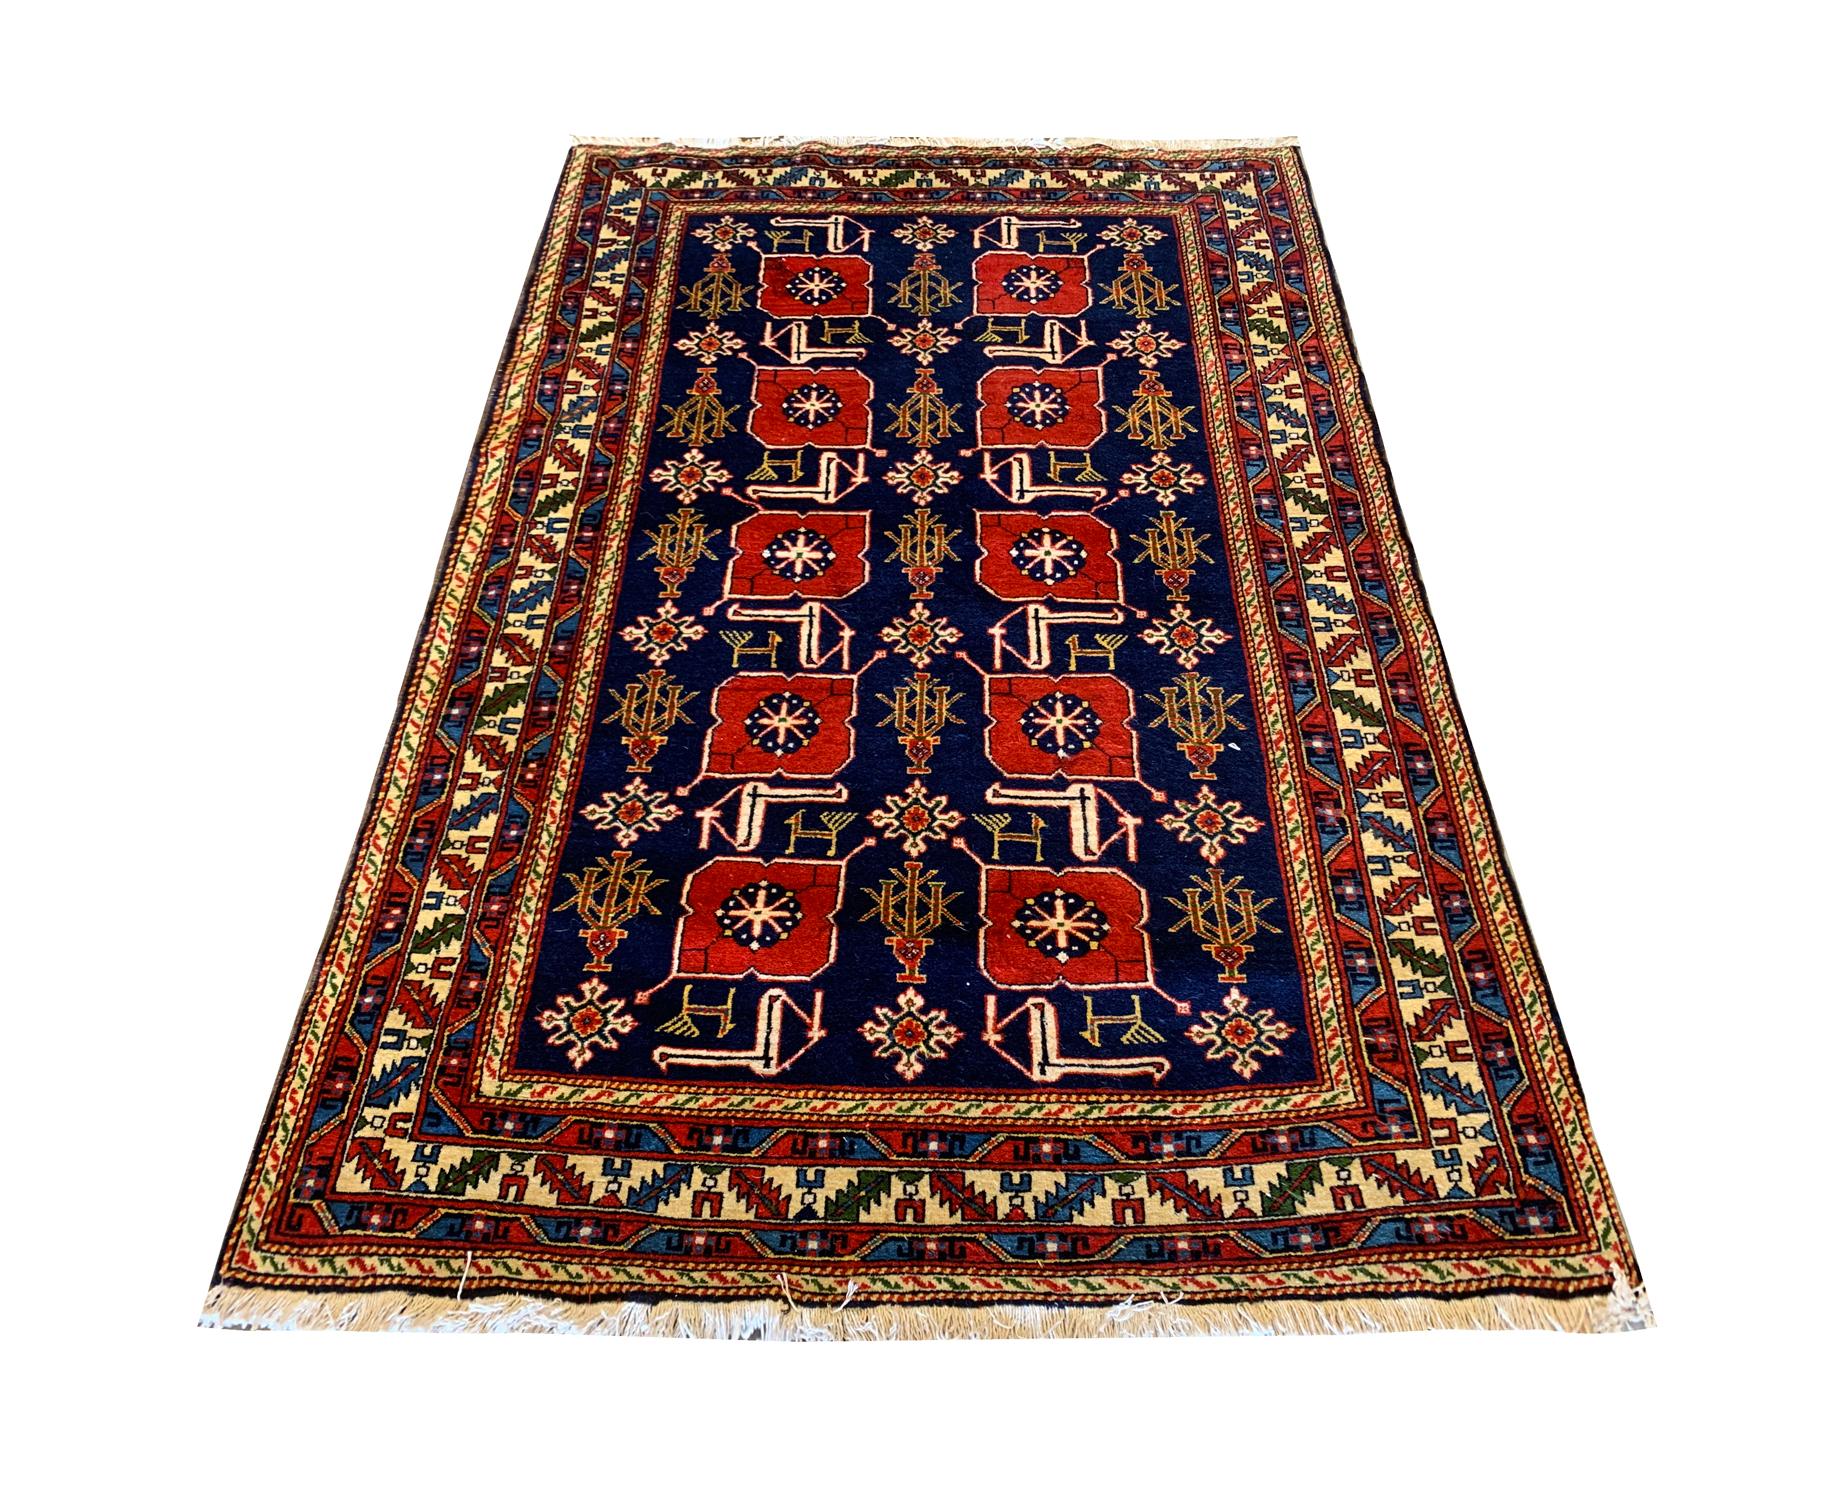 Blue and red make up the main colours in this fine wool Karakashli rug, woven by hand in Azerbaijan. This piece is collectable and features a deep blue background with a highly detailed pattern design woven in red, cream gold, and beige accents. The